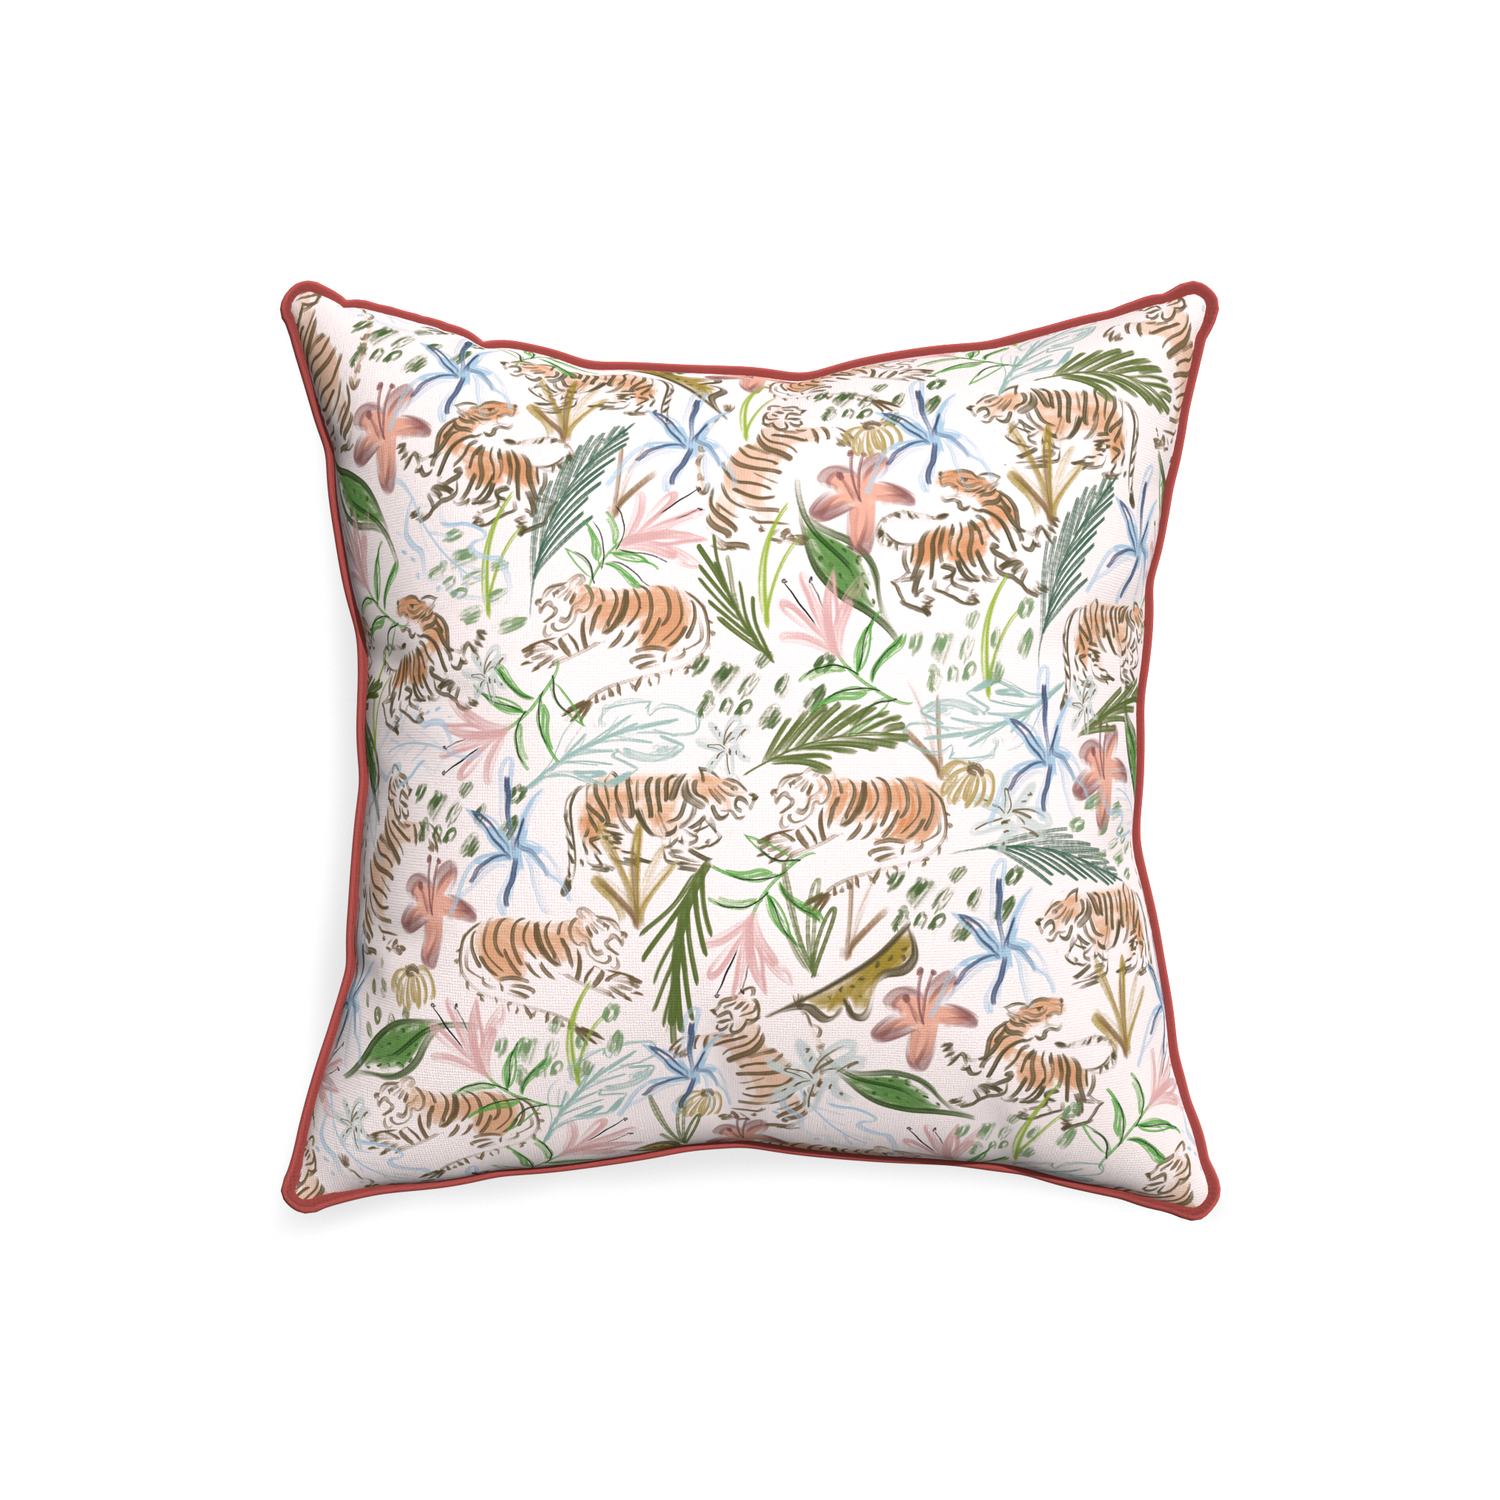 20-square frida pink custom pink chinoiserie tigerpillow with c piping on white background